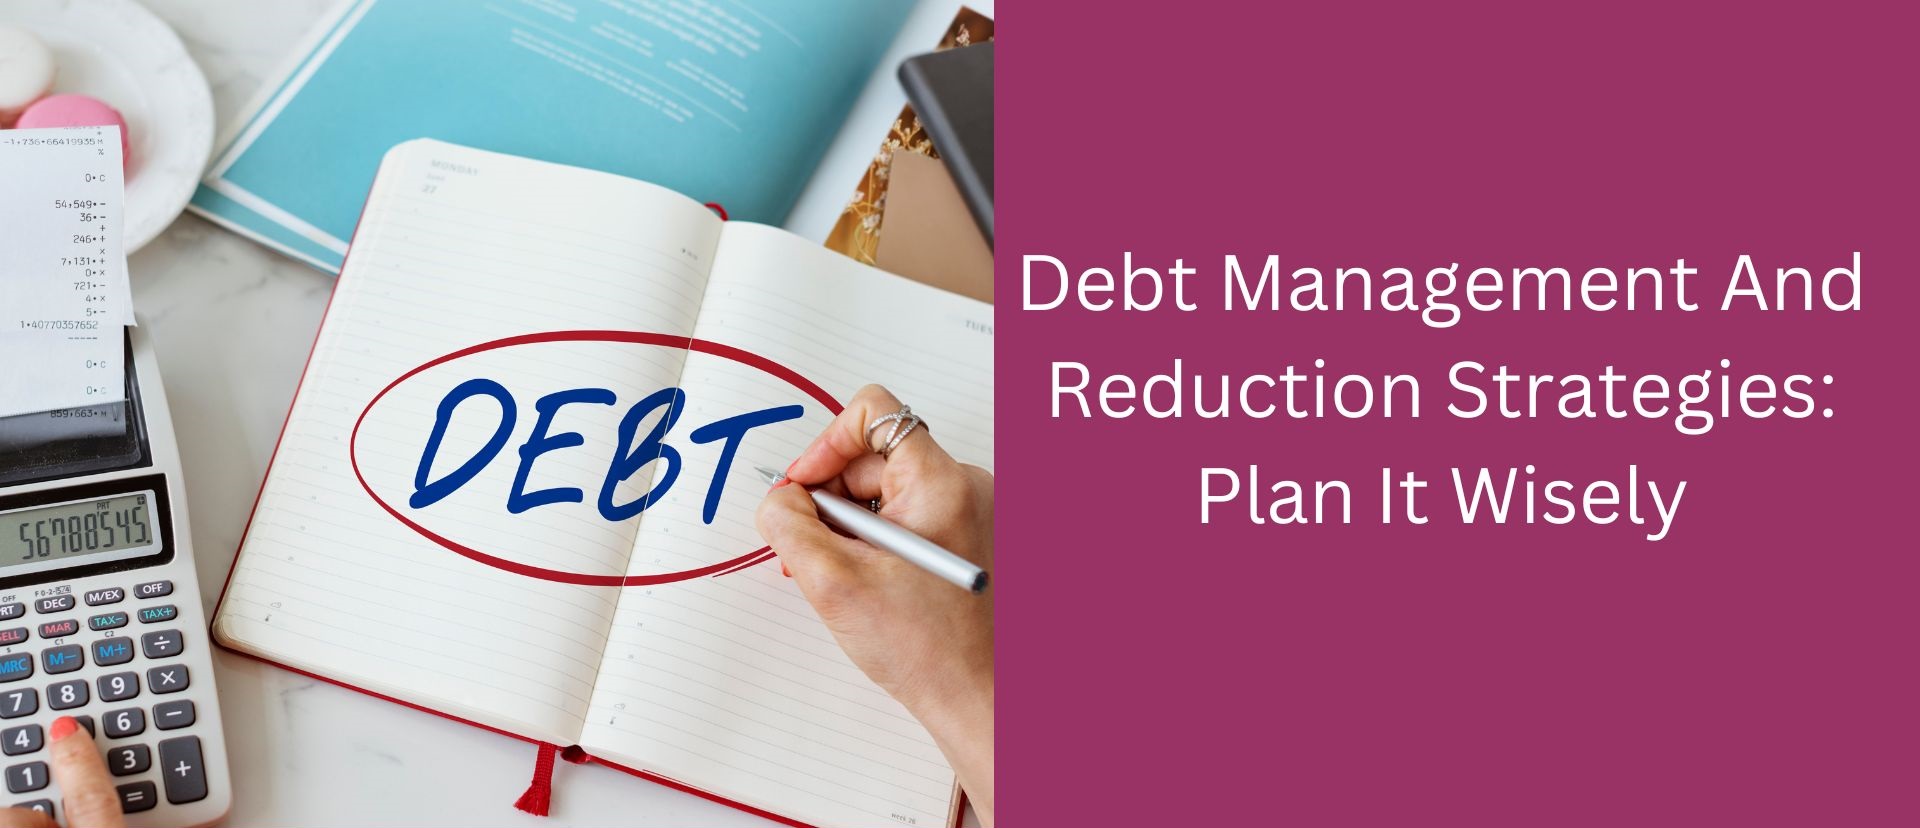 Debt Management And Reduction Strategies: Plan It Wisely